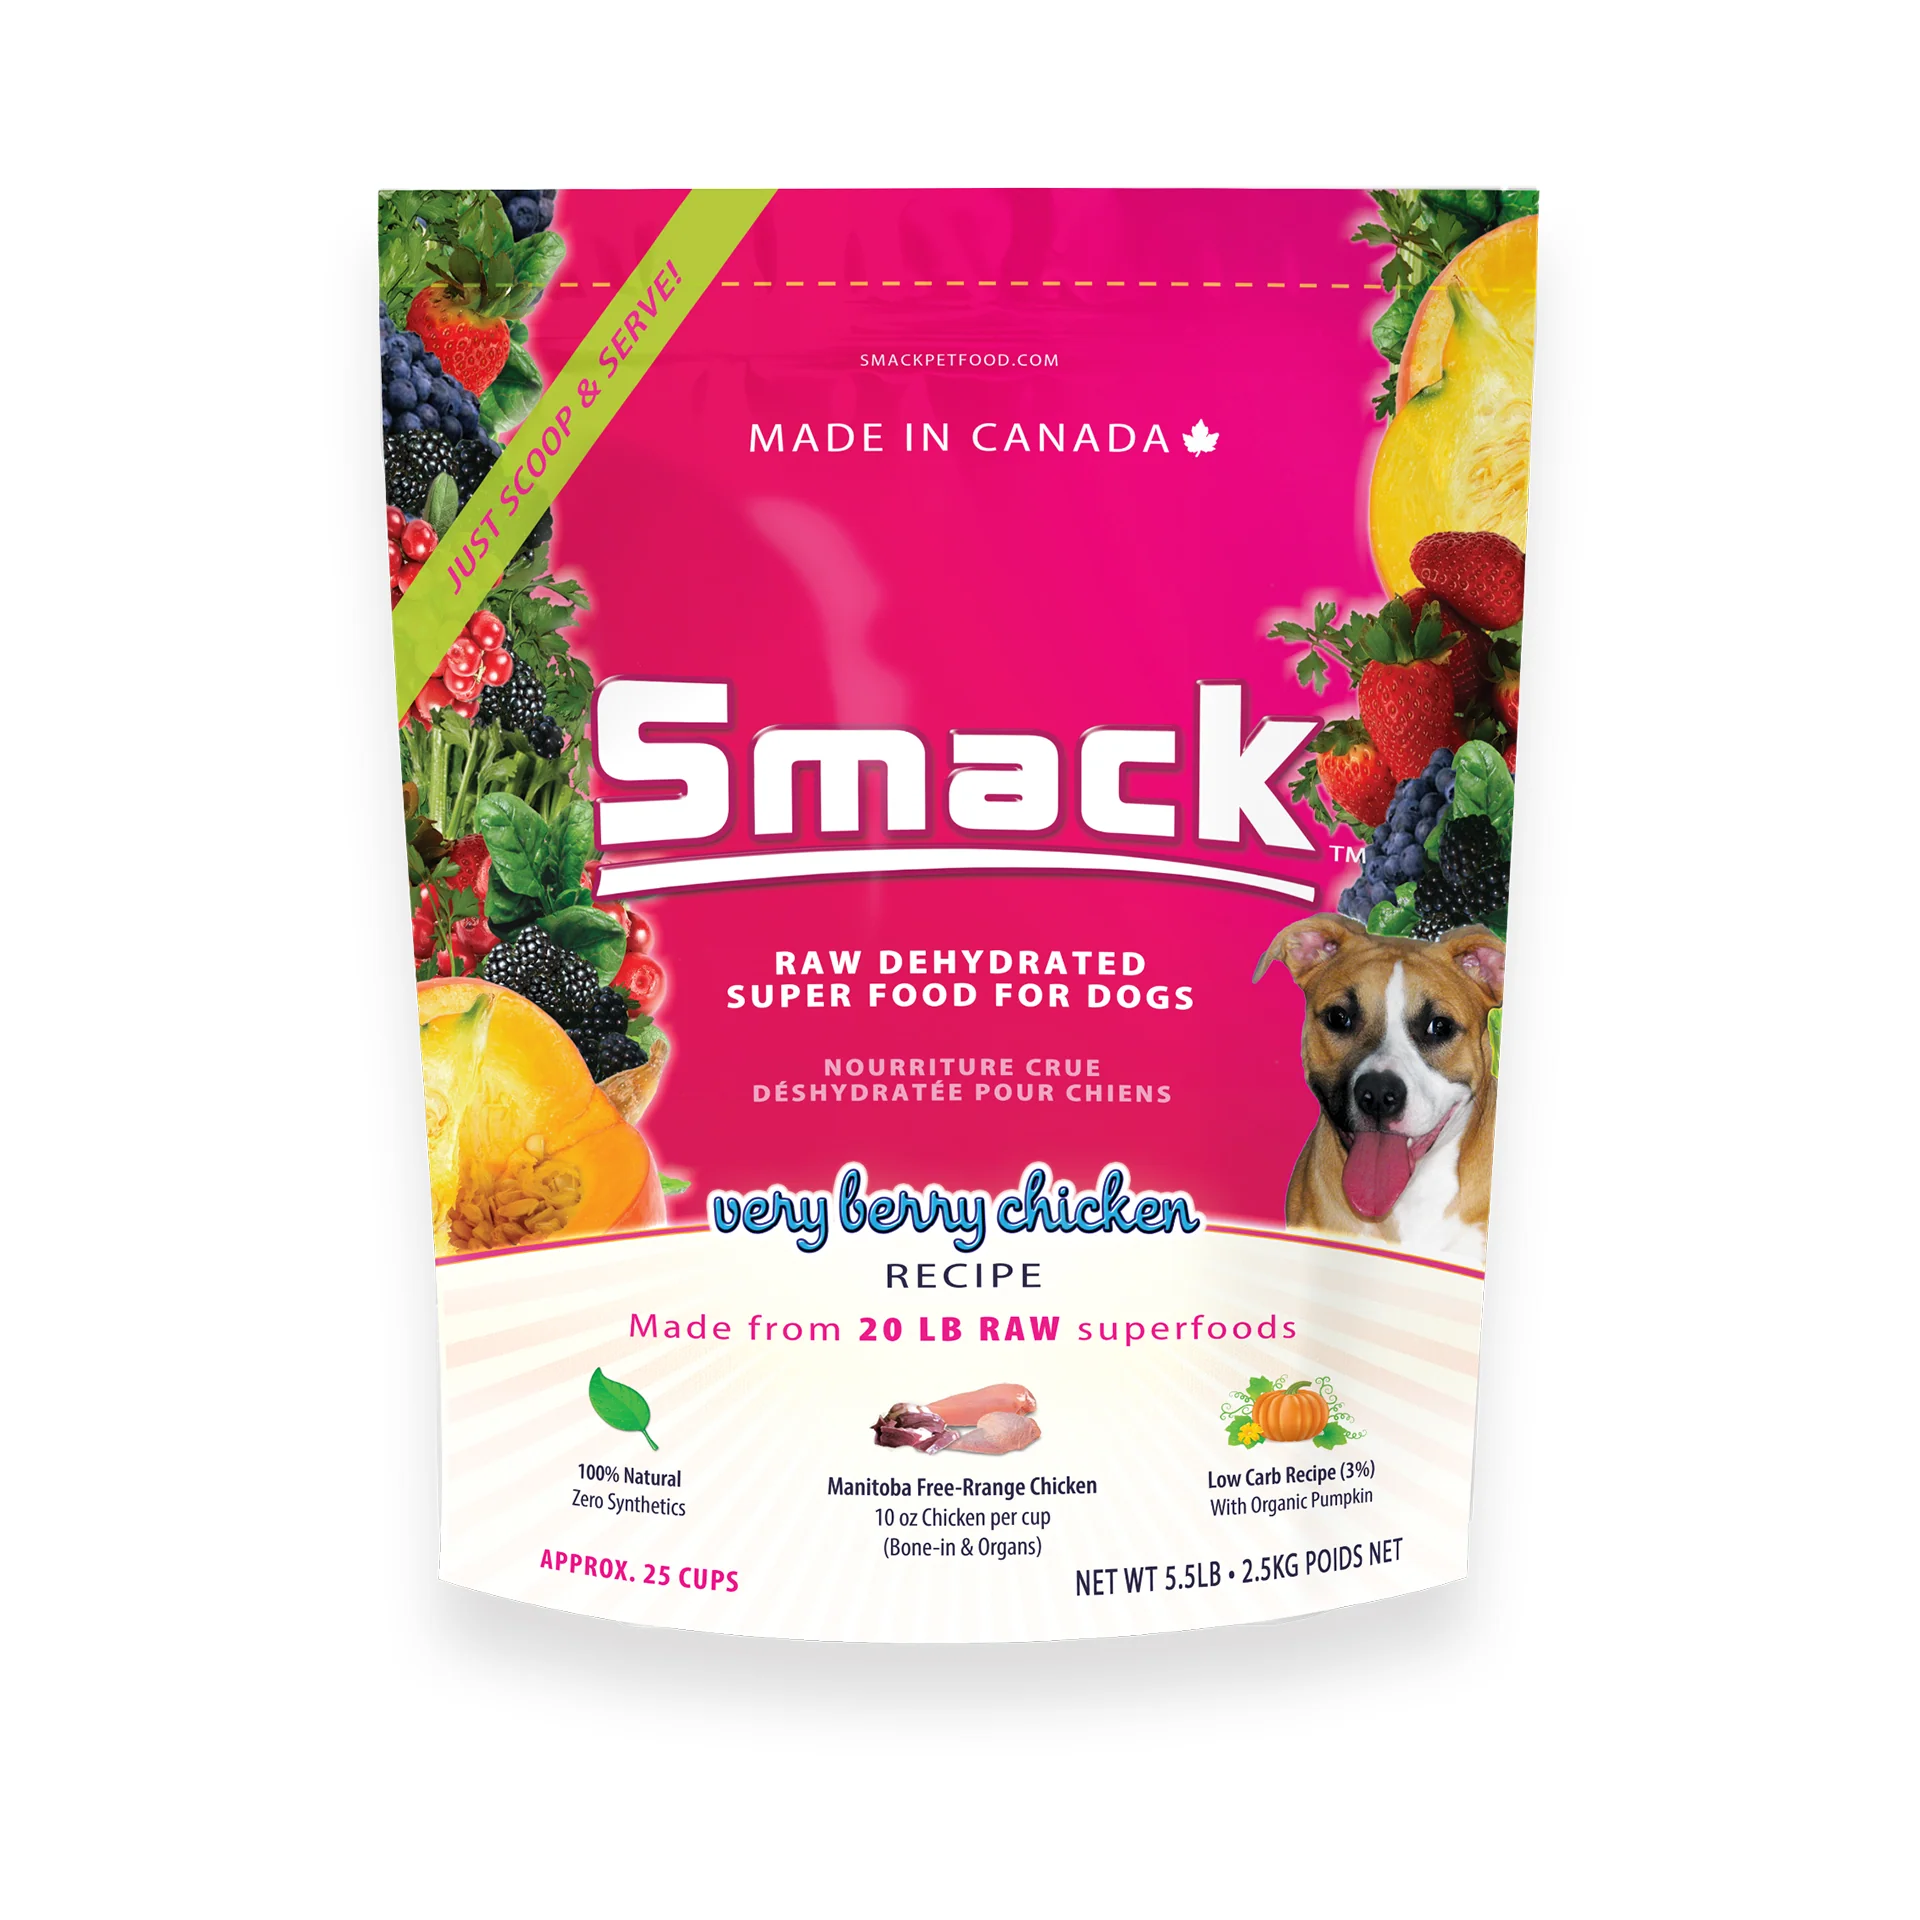 Smack Dog Food Review (Raw Dehydrated)